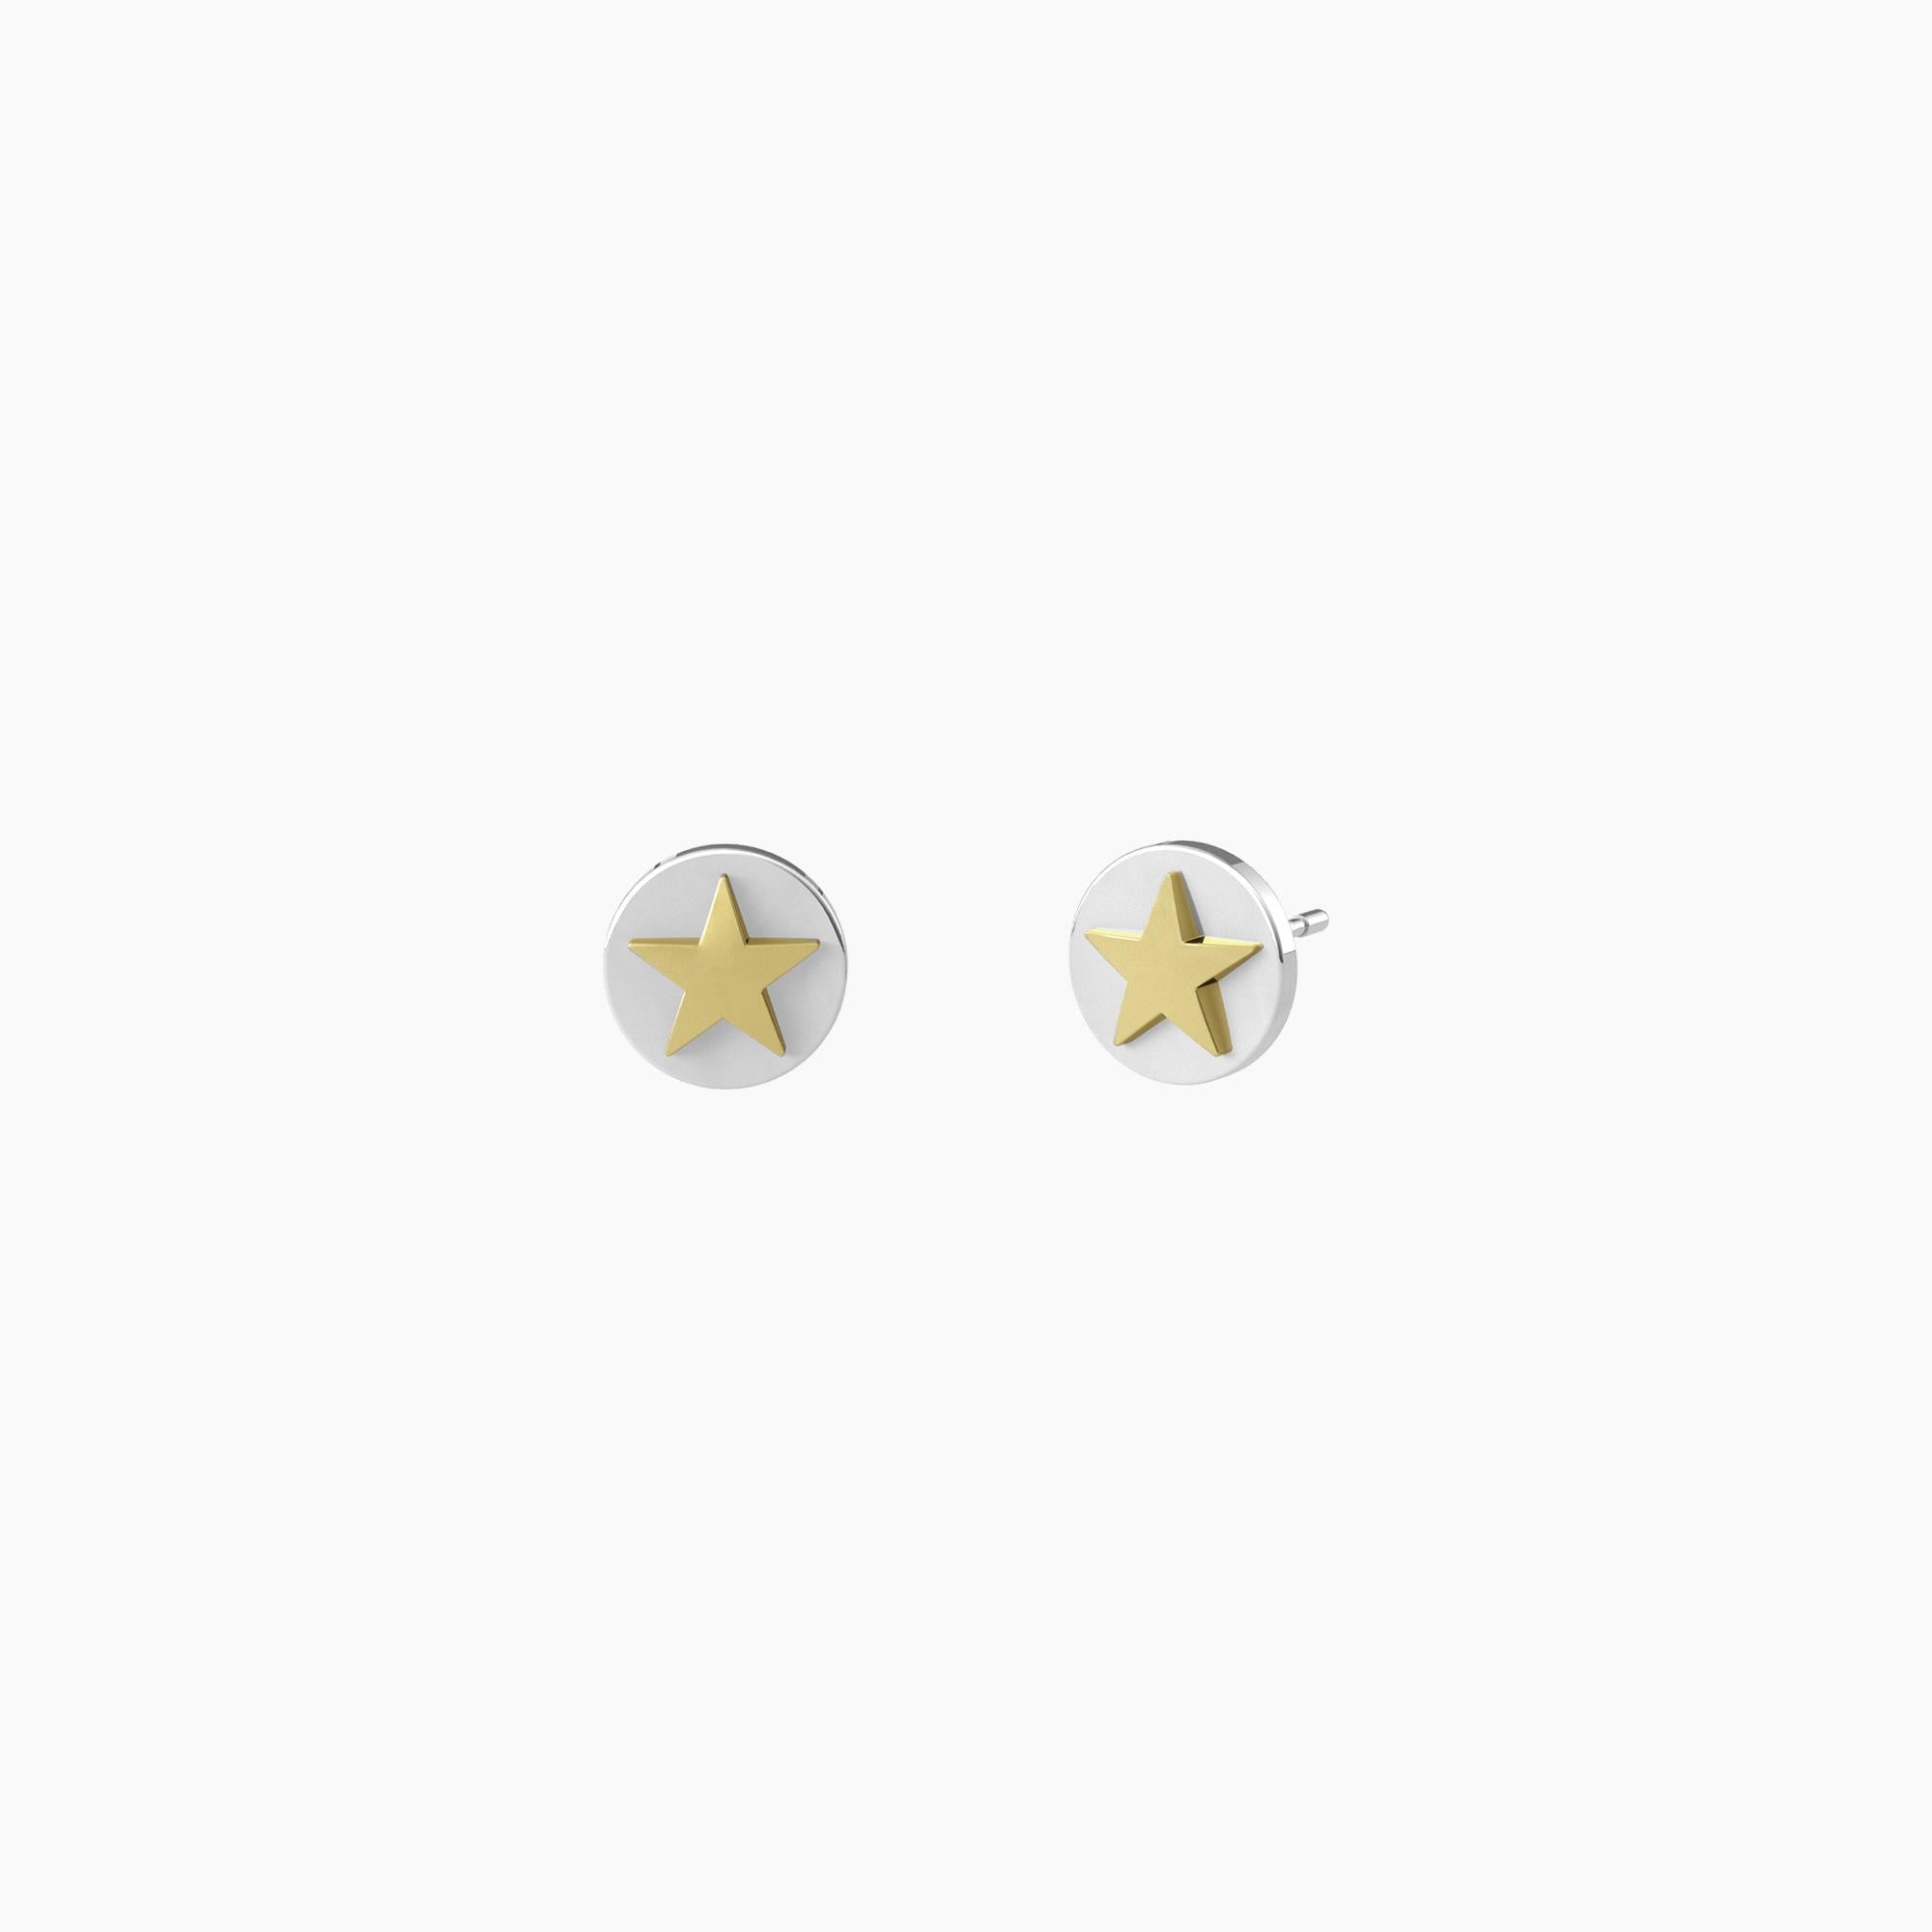 Lobe earrings with golden star
 HEARTS AND STARS - 761007